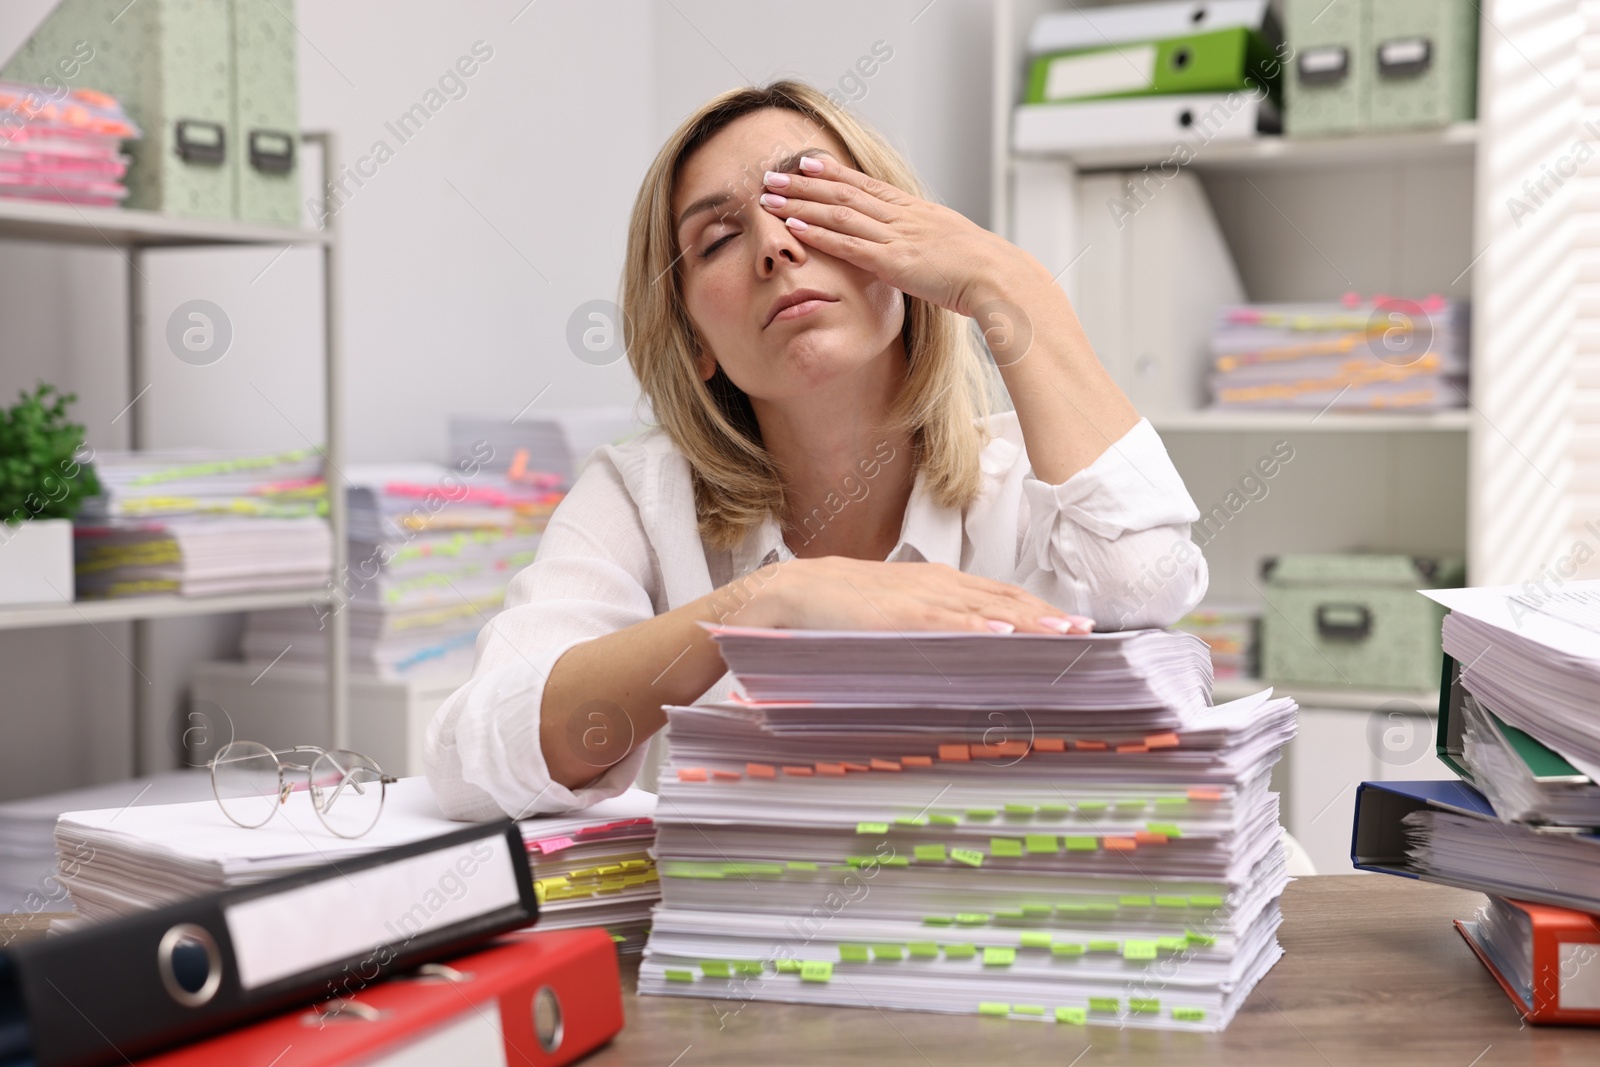 Photo of Overwhelmed woman surrounded by documents at workplace in office